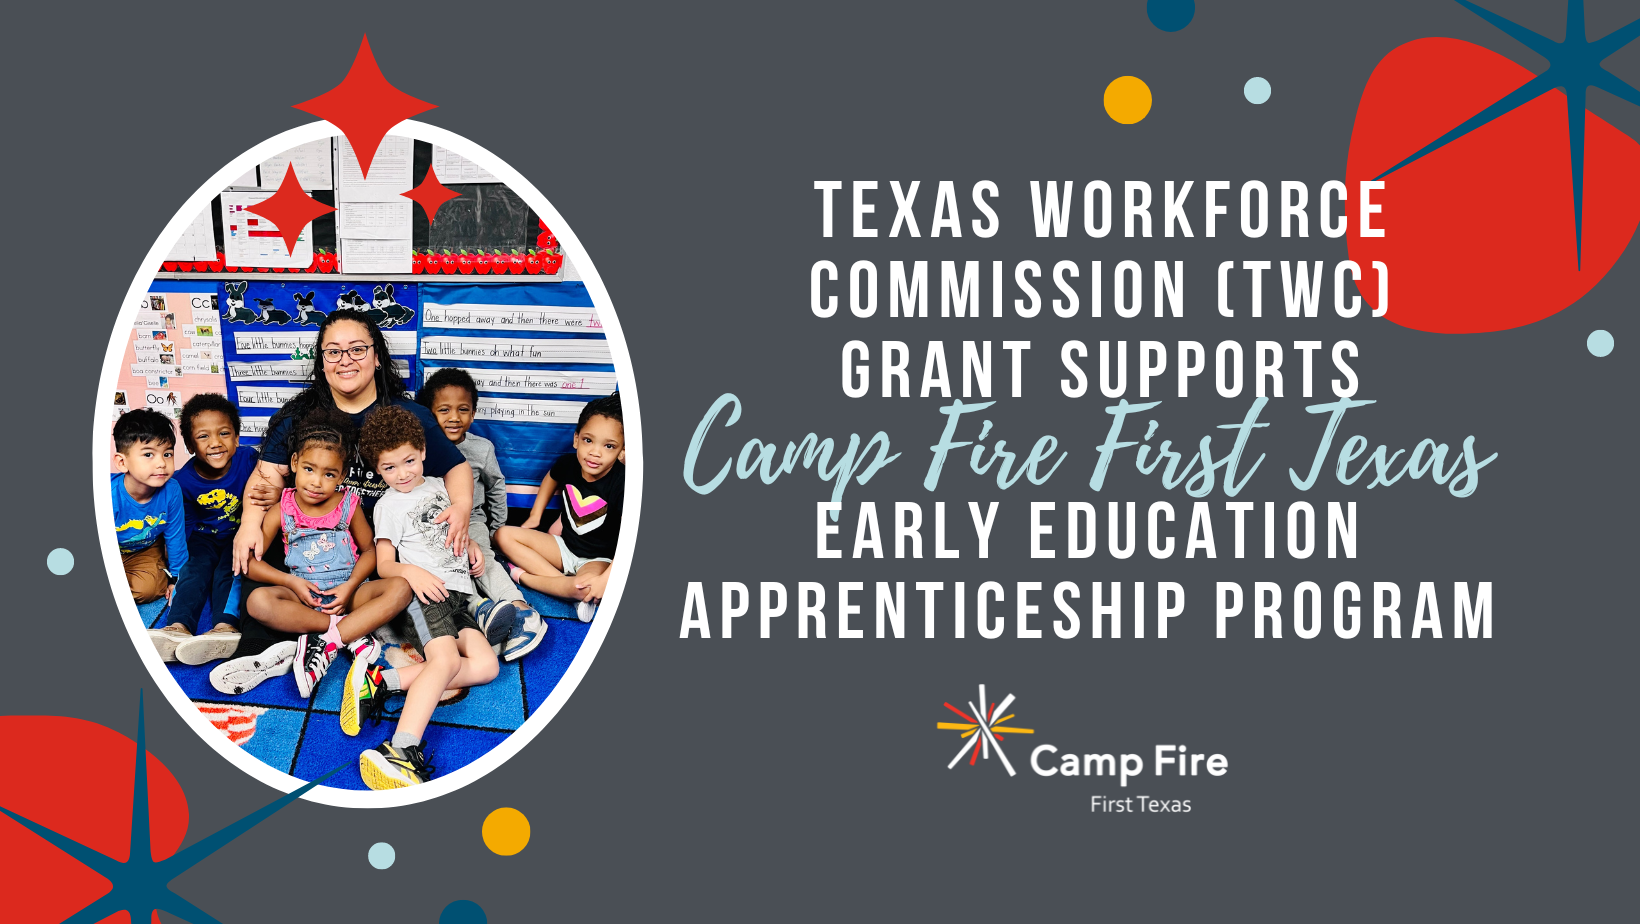 Texas Workforce Commission (TWC) Grant Supports Camp Fire First Texas Early Education Apprenticeship Program, a Camp Fire First Texas blog